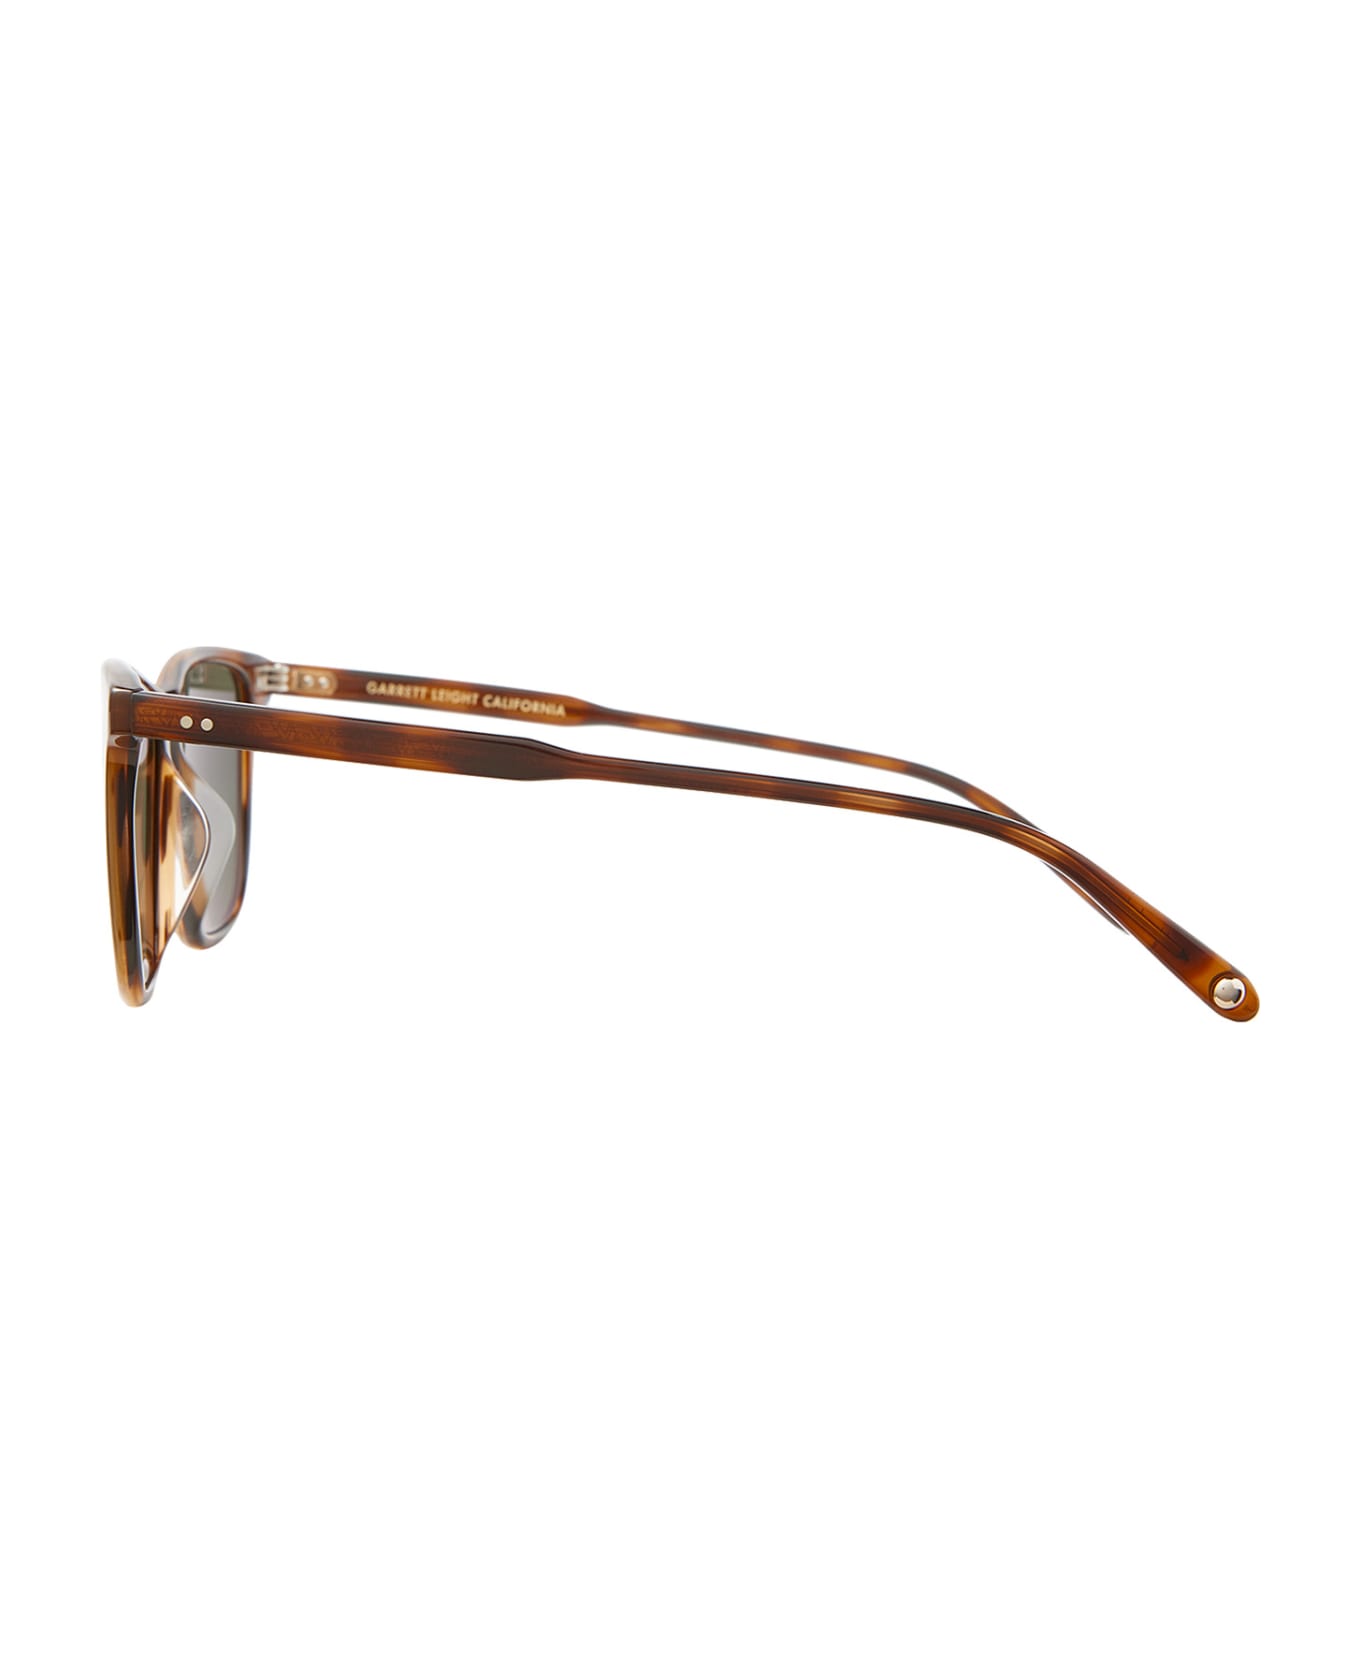 Garrett Leight Hayes Sun Spotted Brown Shell Sunglasses - Spotted Brown Shell